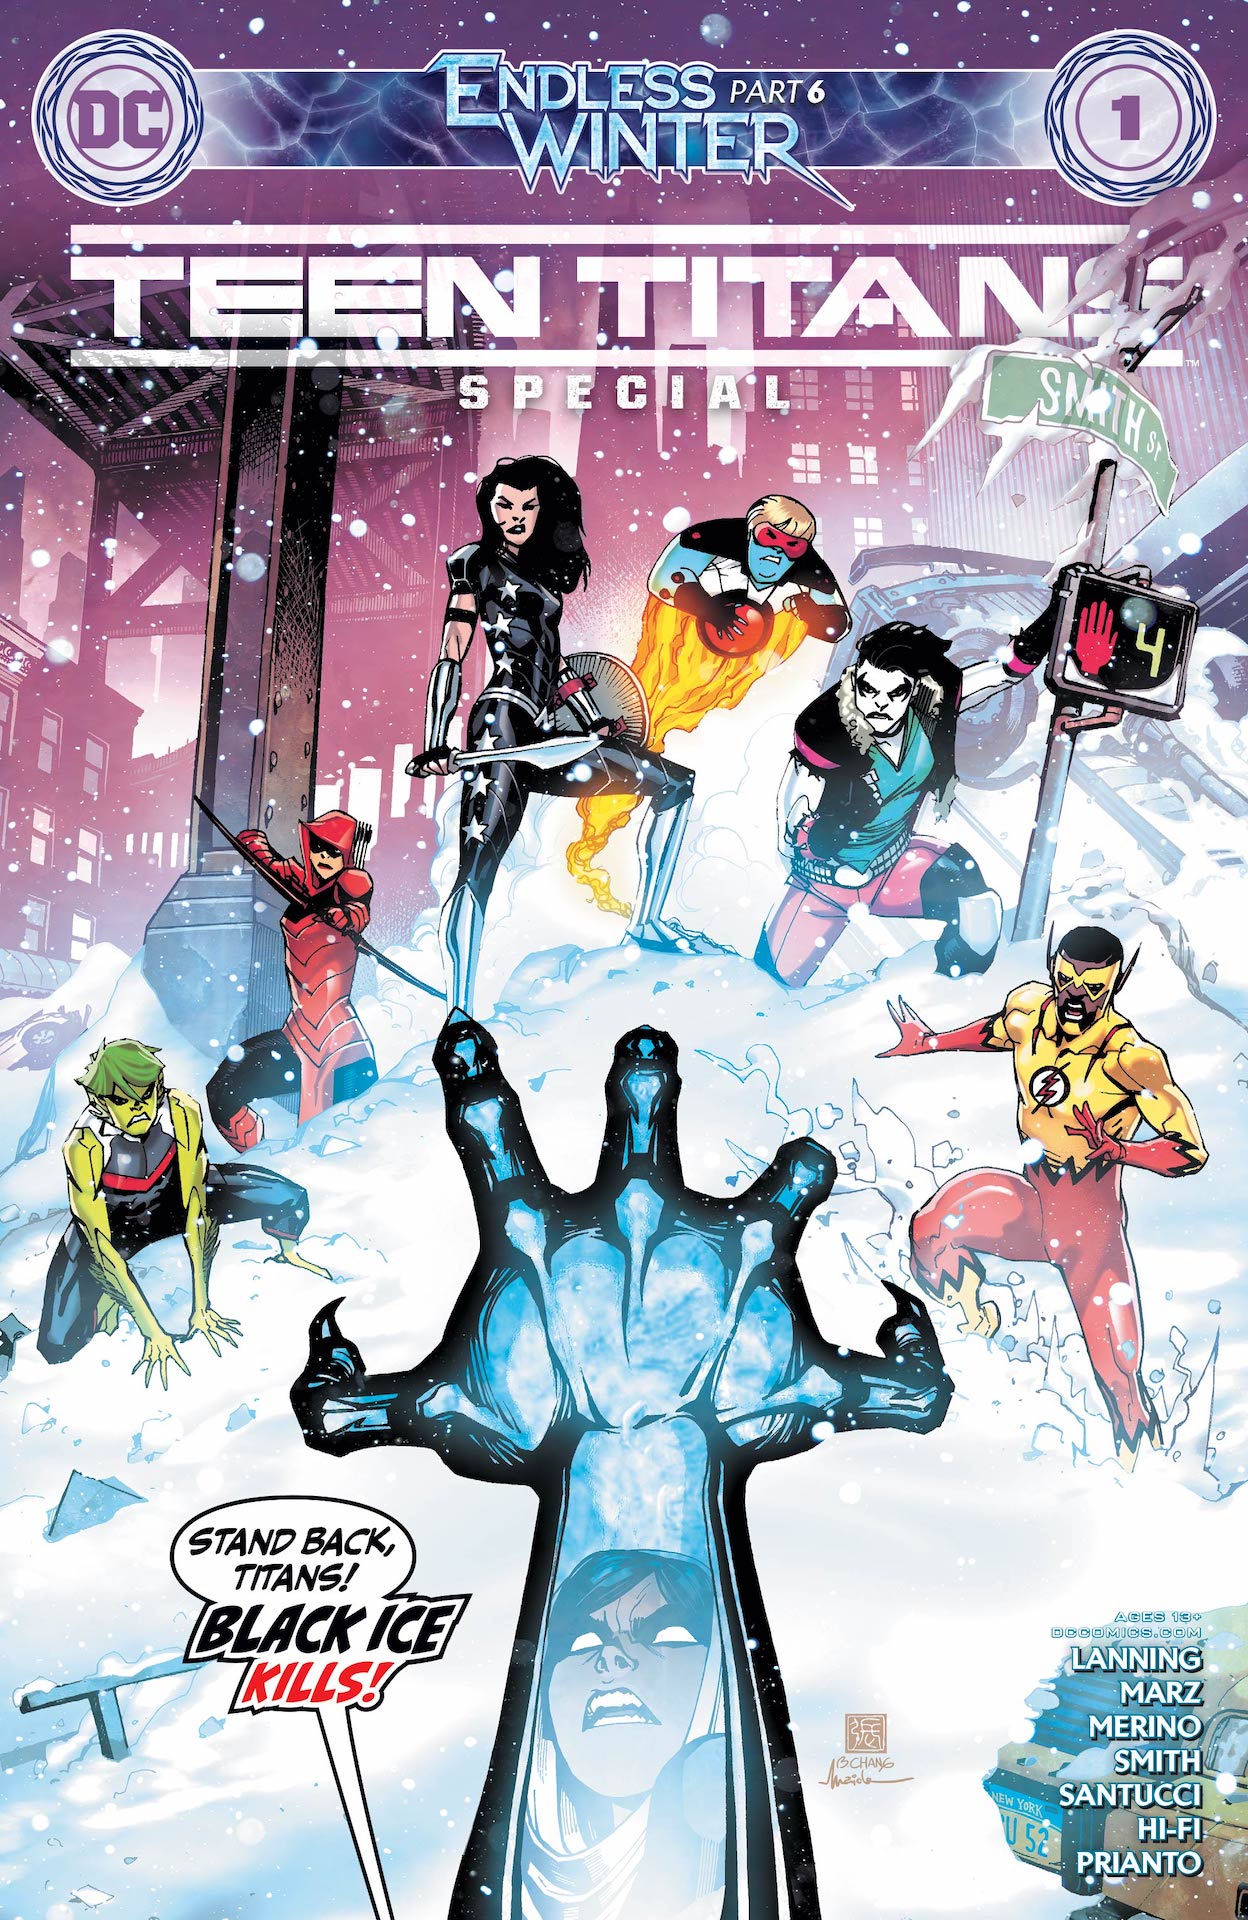 Teen Titans: Endless Winter Special #1 preview